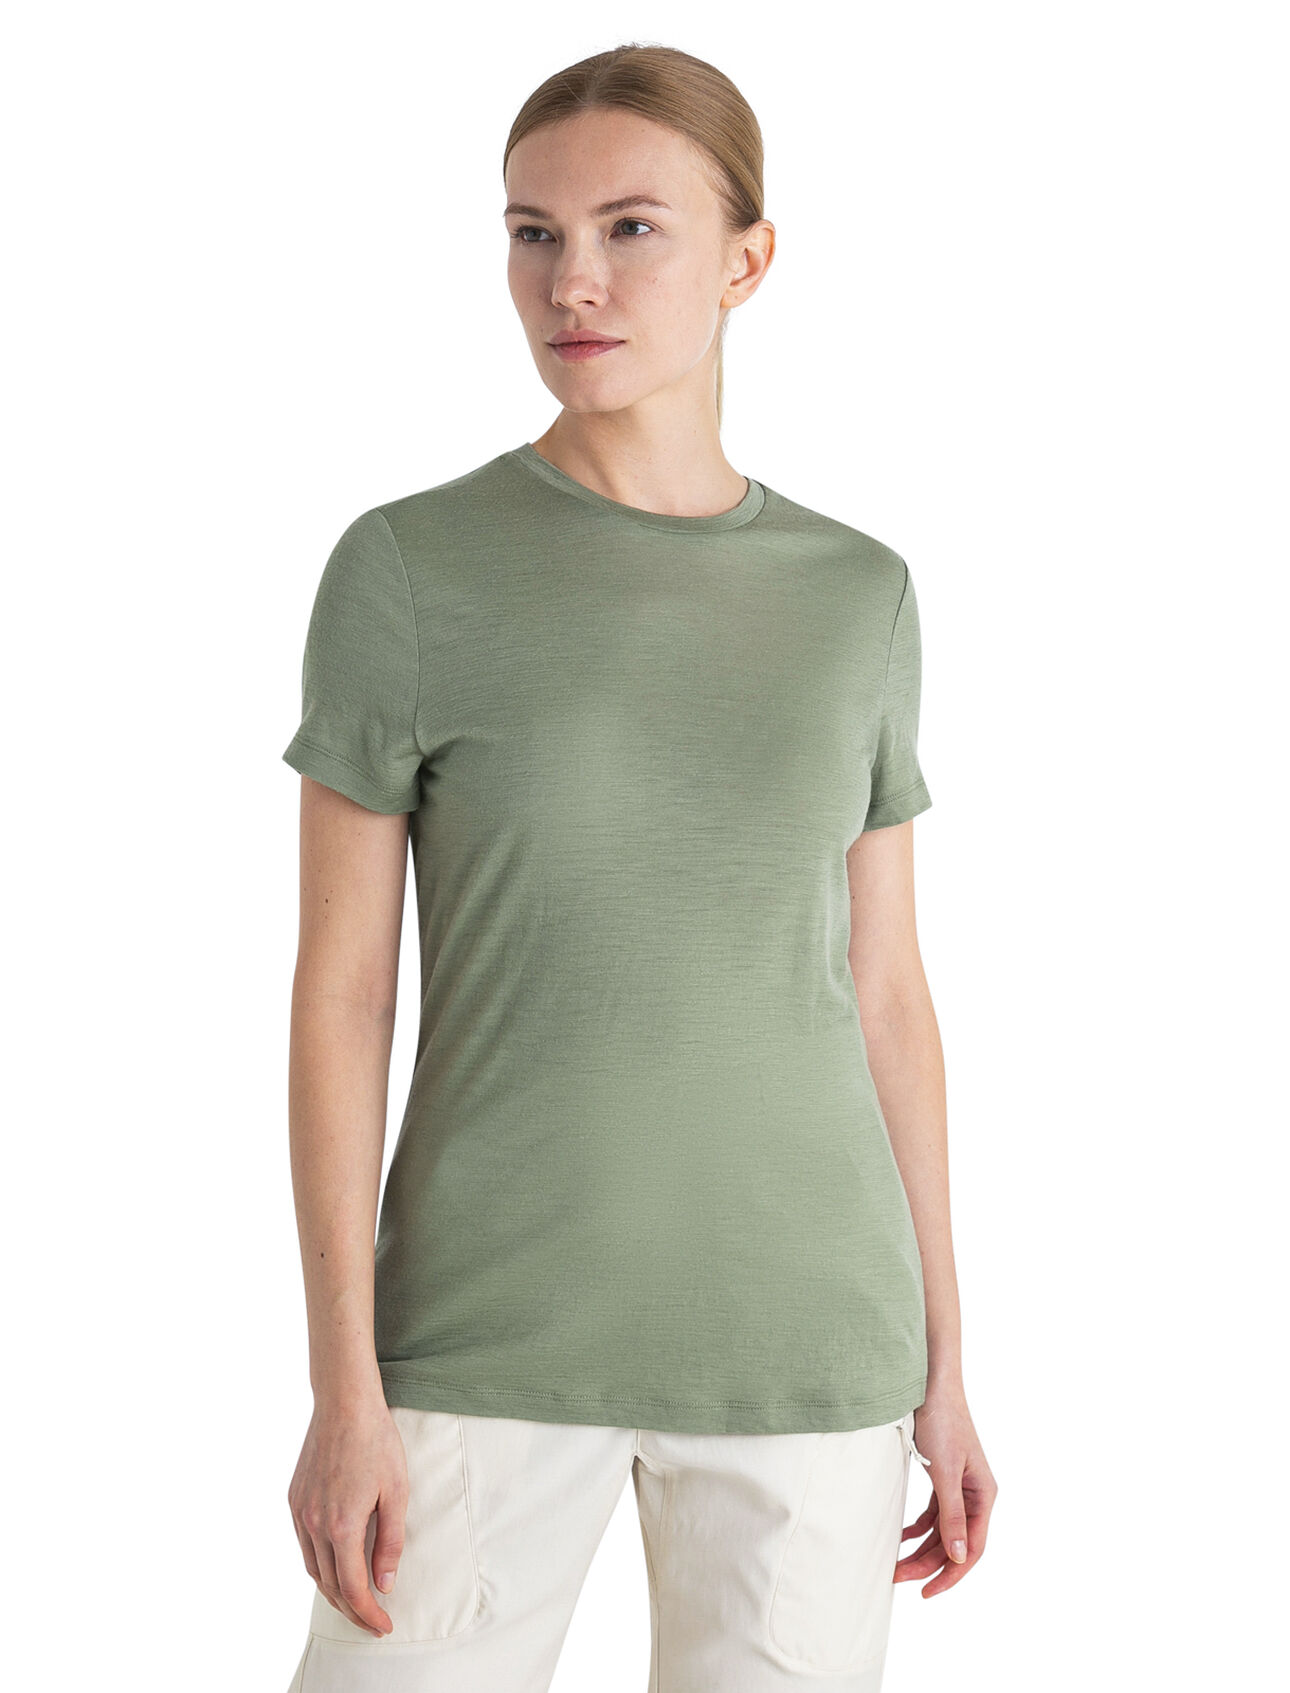 Womens Merino 150 Tech Lite III T-Shirt Our most versatile tech tee that provides comfort, breathability and odour-resistance for four seasons worth of adventure, the Tech Lite III Short Sleeve Tee features 100% merino for all-natural performance.